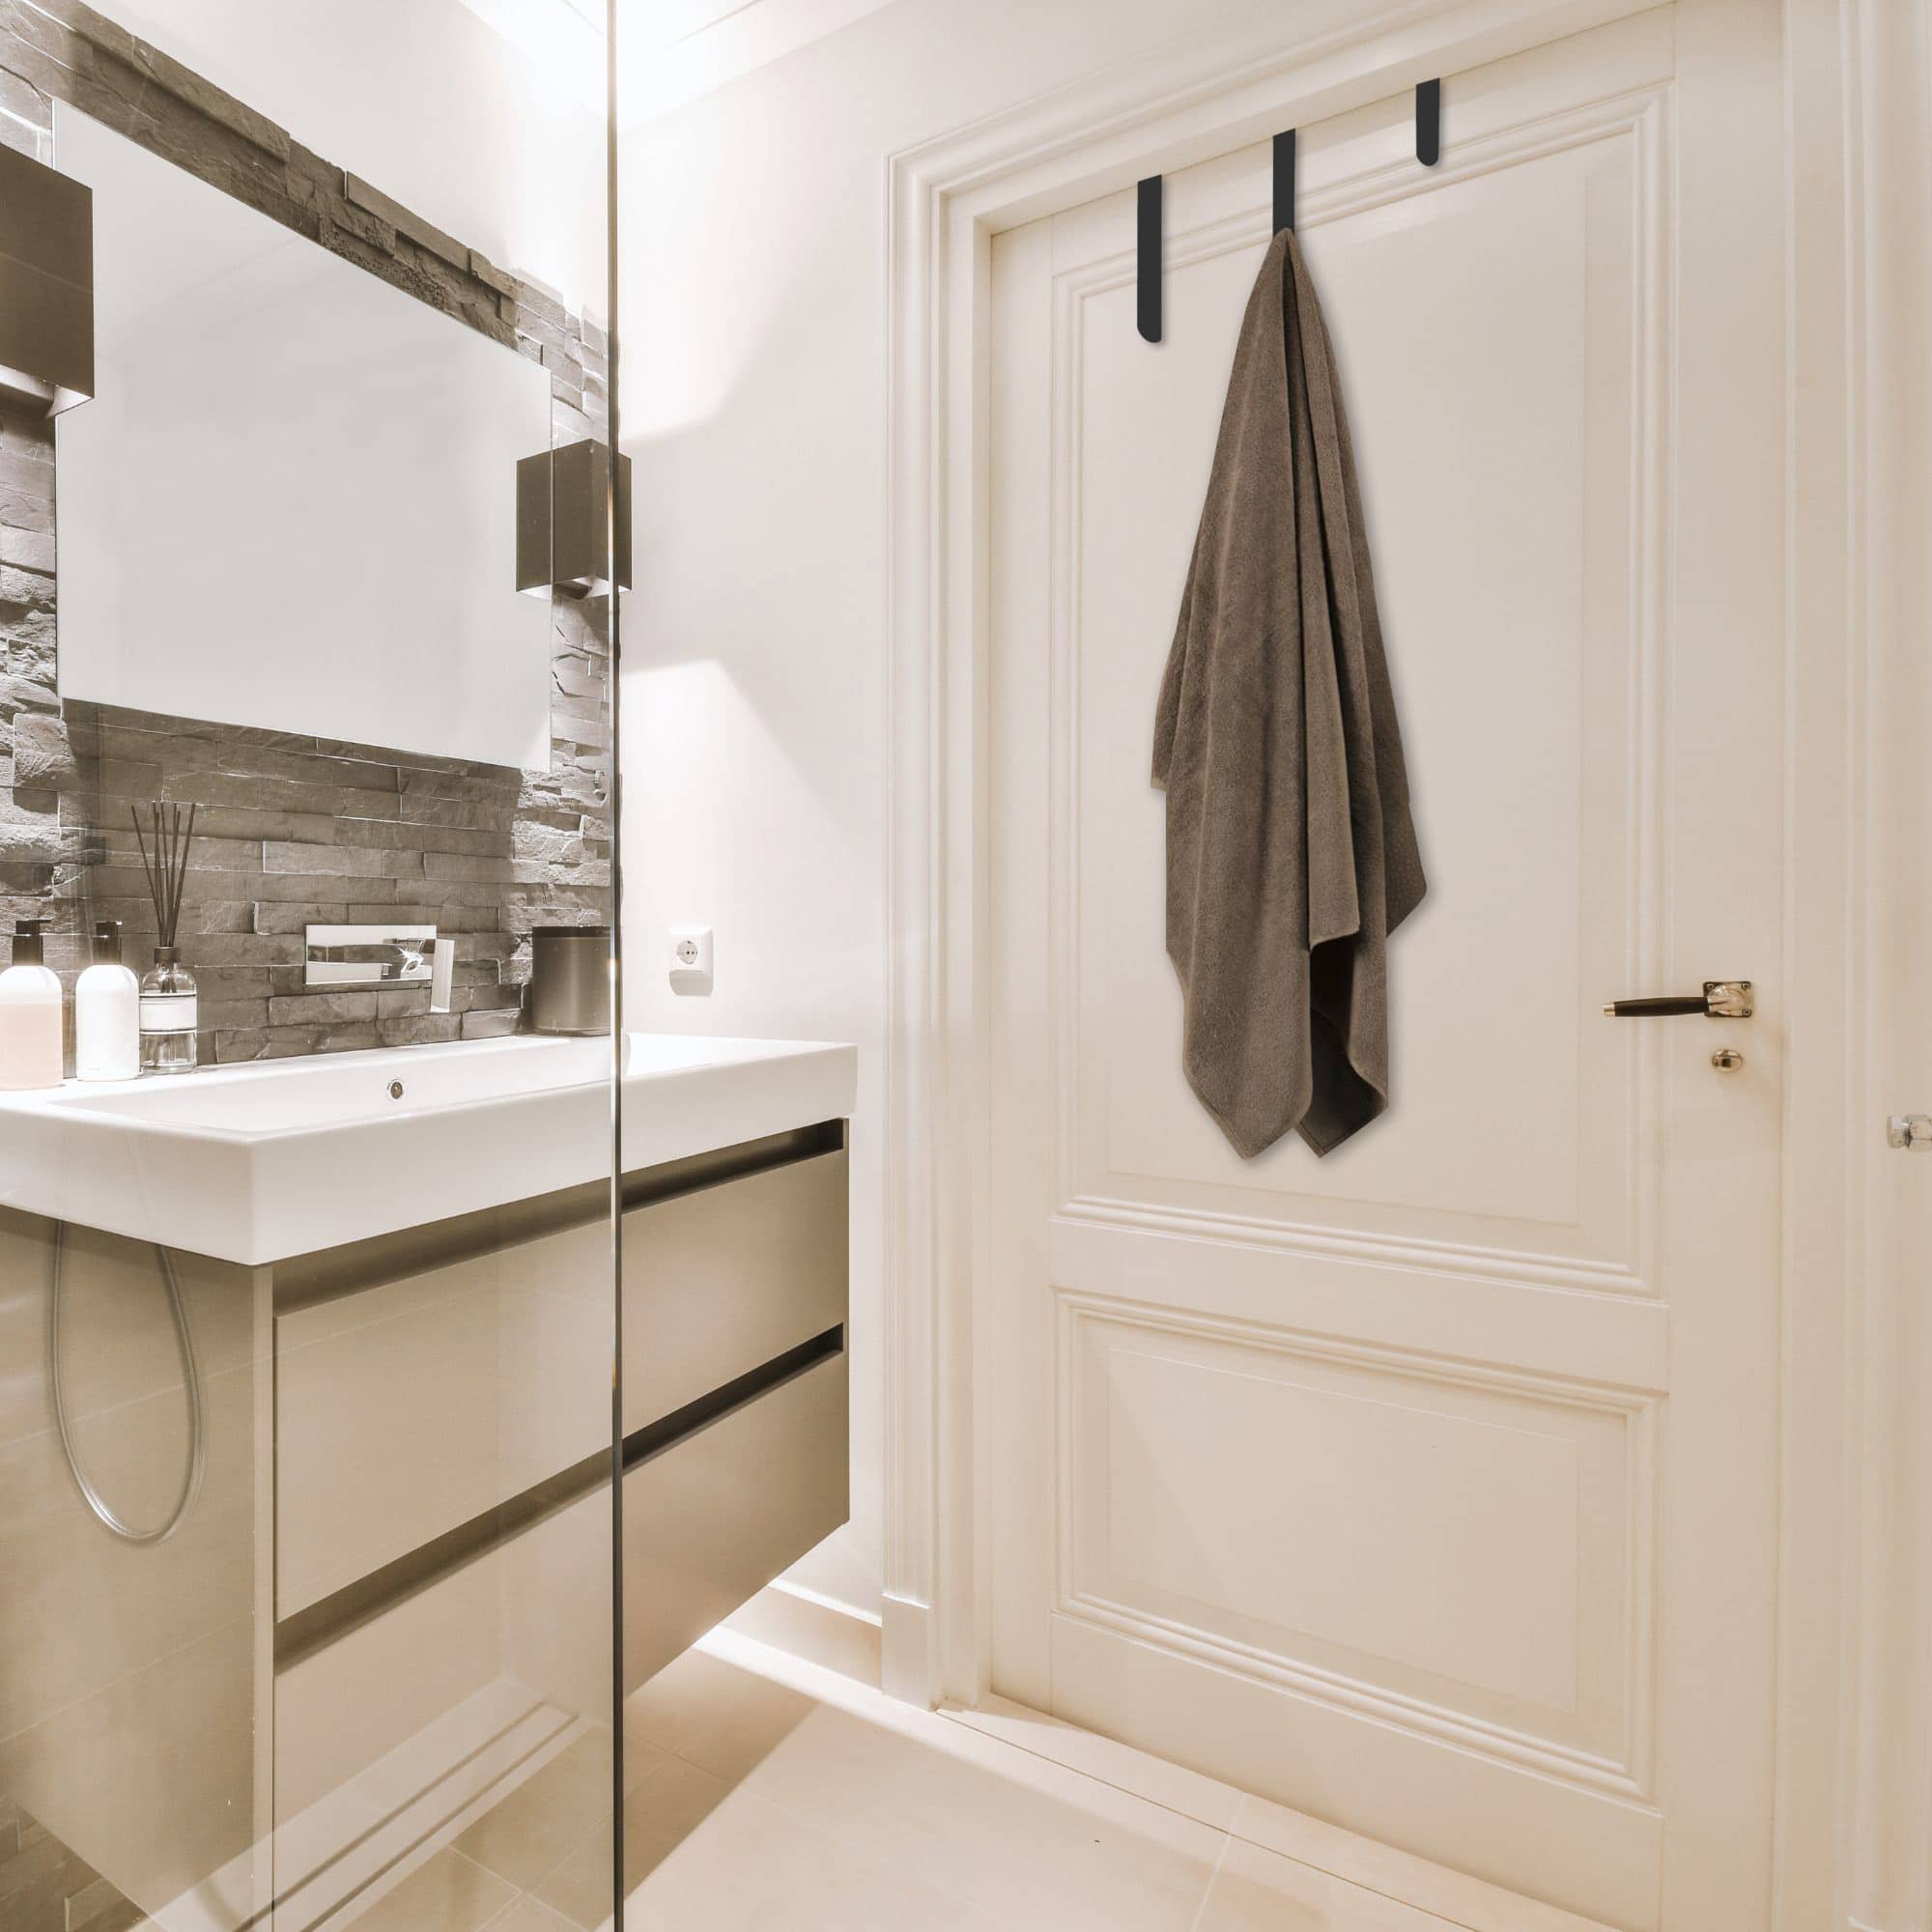 Luxurious Bathroom with Stylish Black Over-the-Door Hooks Holding a Grey Towel, Complementing the Elegant White Door and Contemporary Interior Decor.